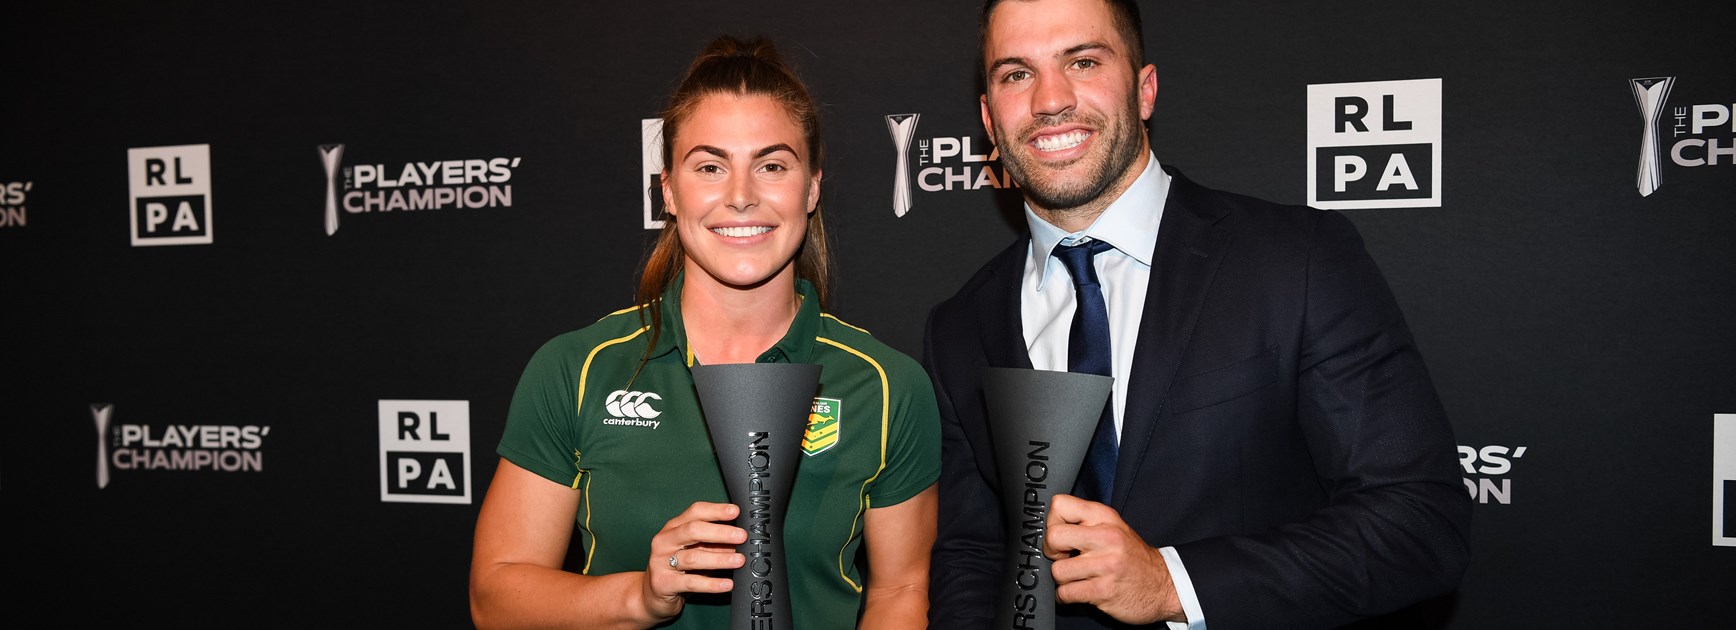 Jess Sergis and James Tedesco with their Players' Champion awards in 2019.